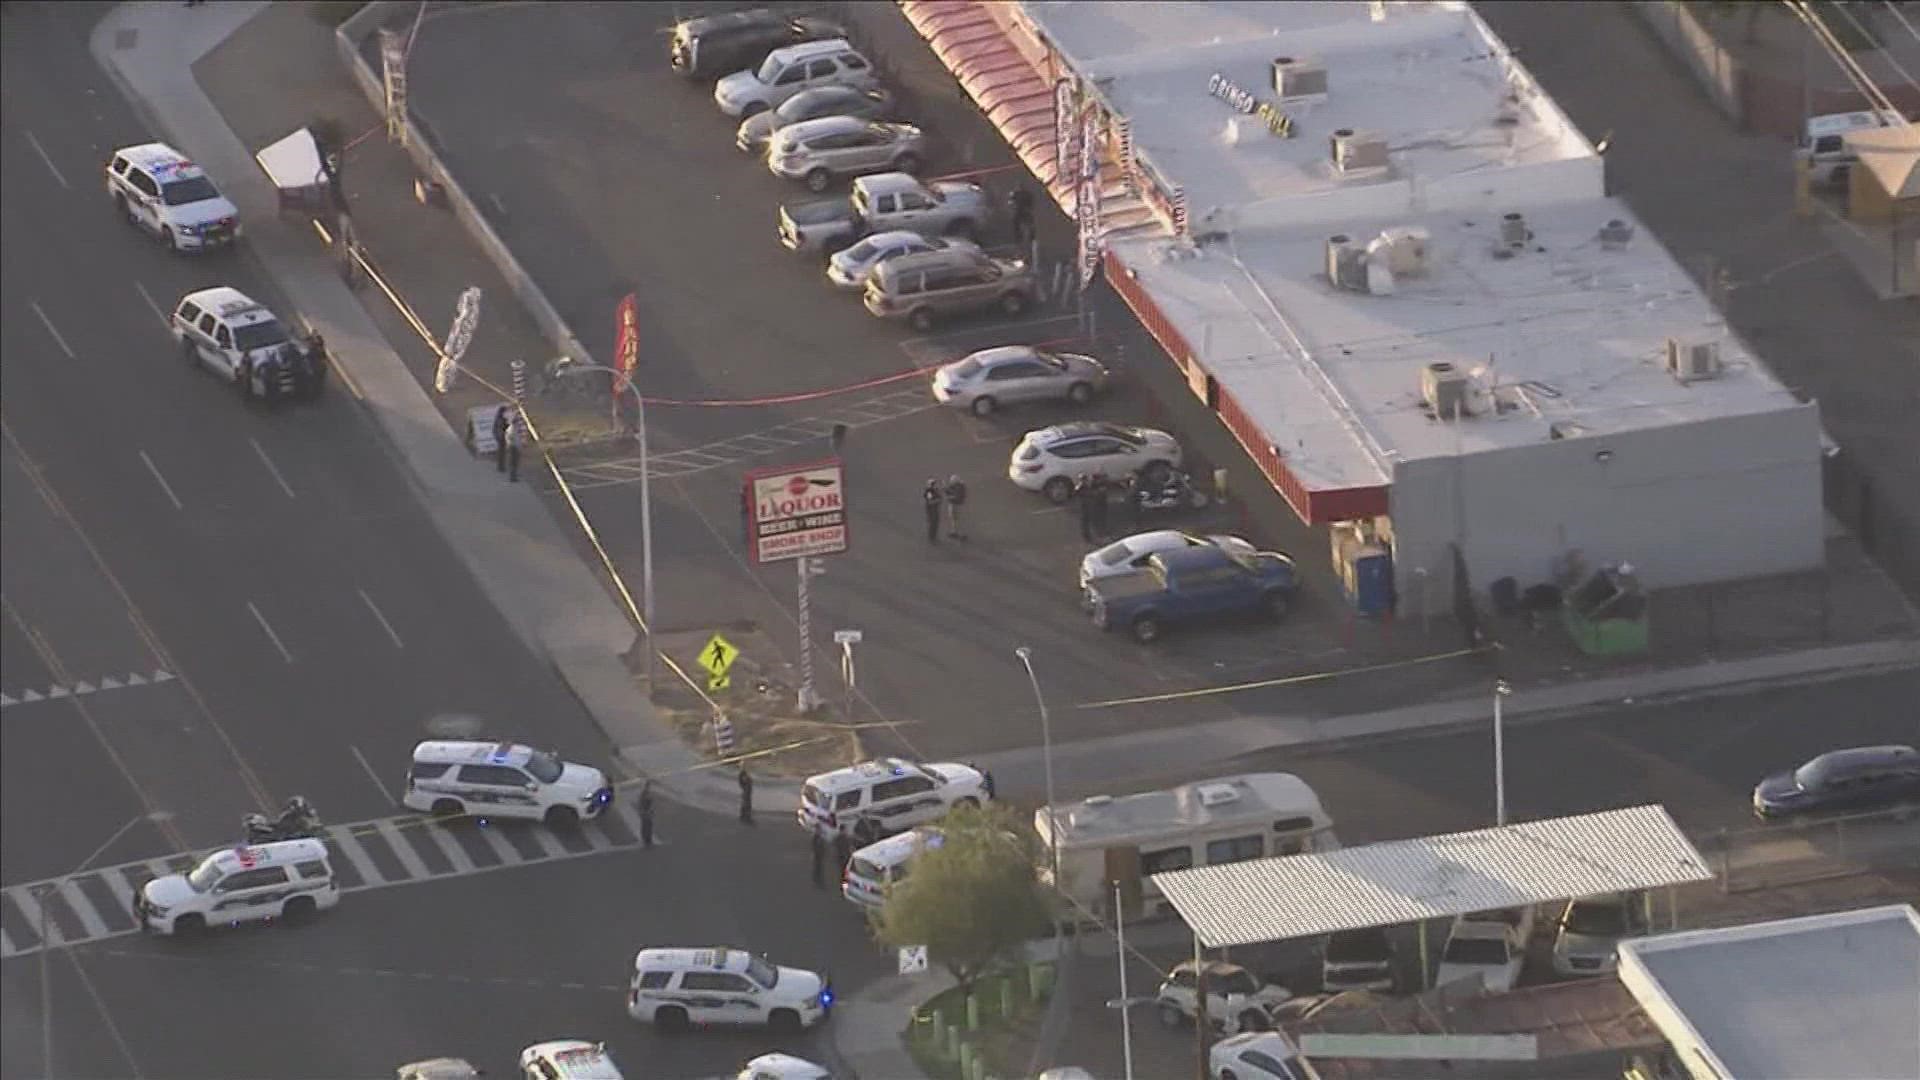 Phoenix police say no officers have been injured, and the suspect is receiving medical treatment.